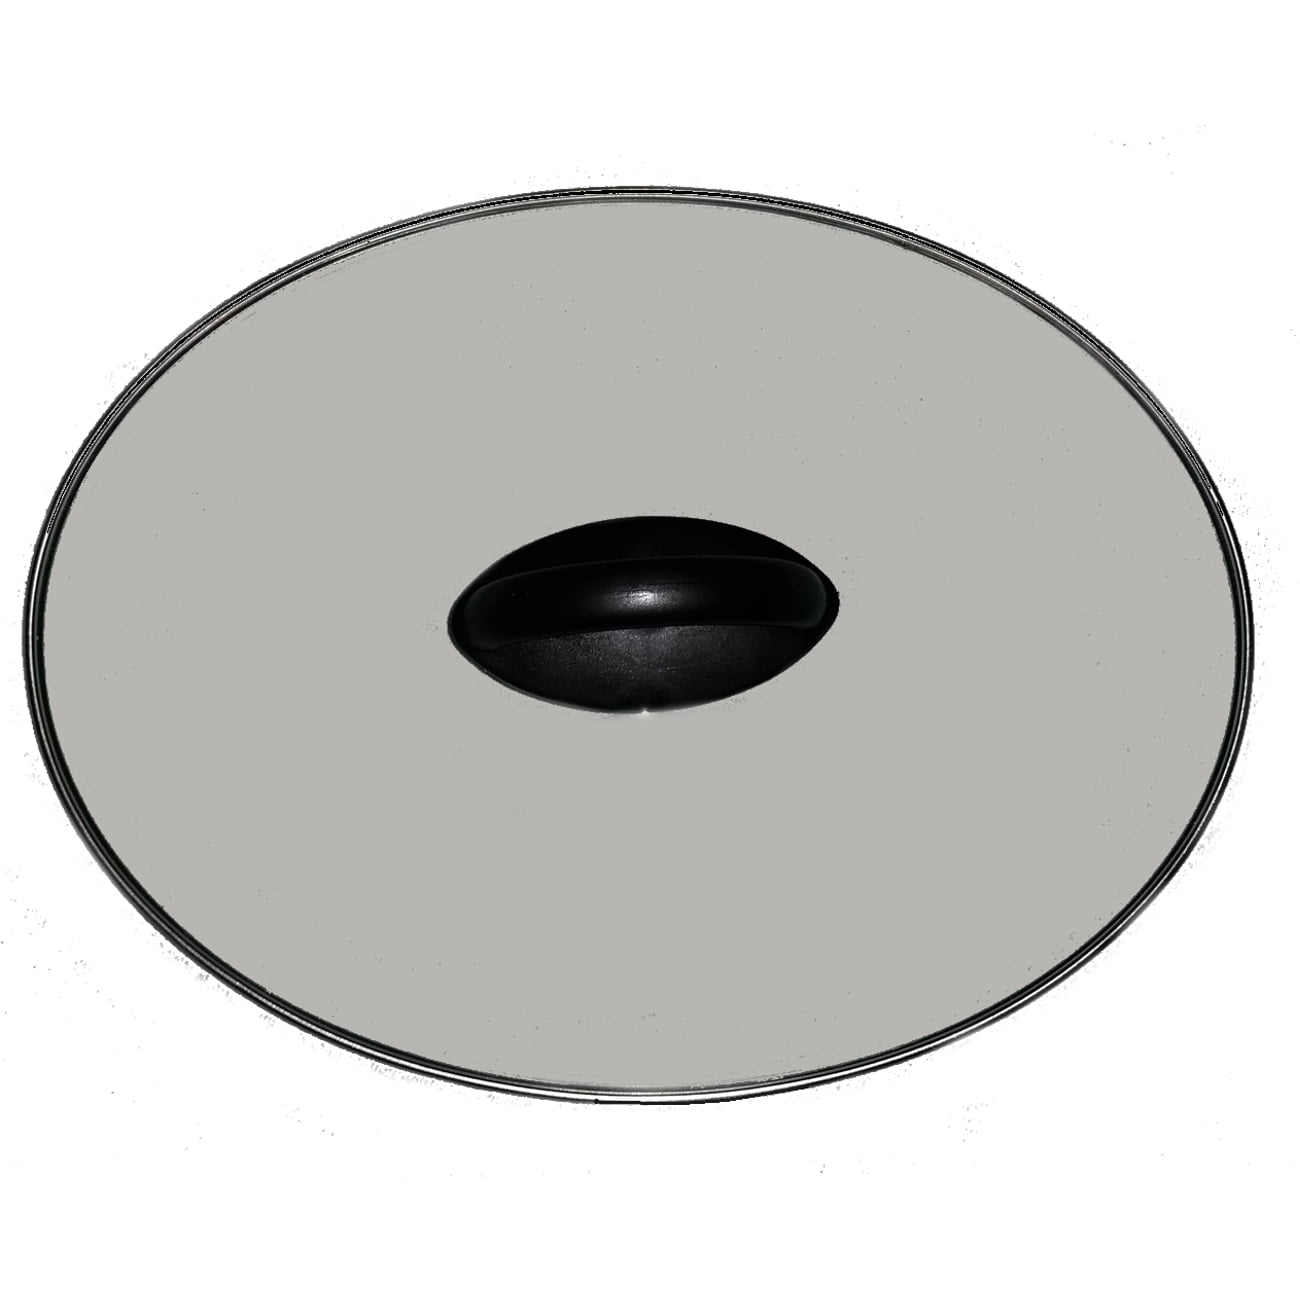 10 Rival Crock Pot Lid For 3300 3350 3351 and 50 similar items